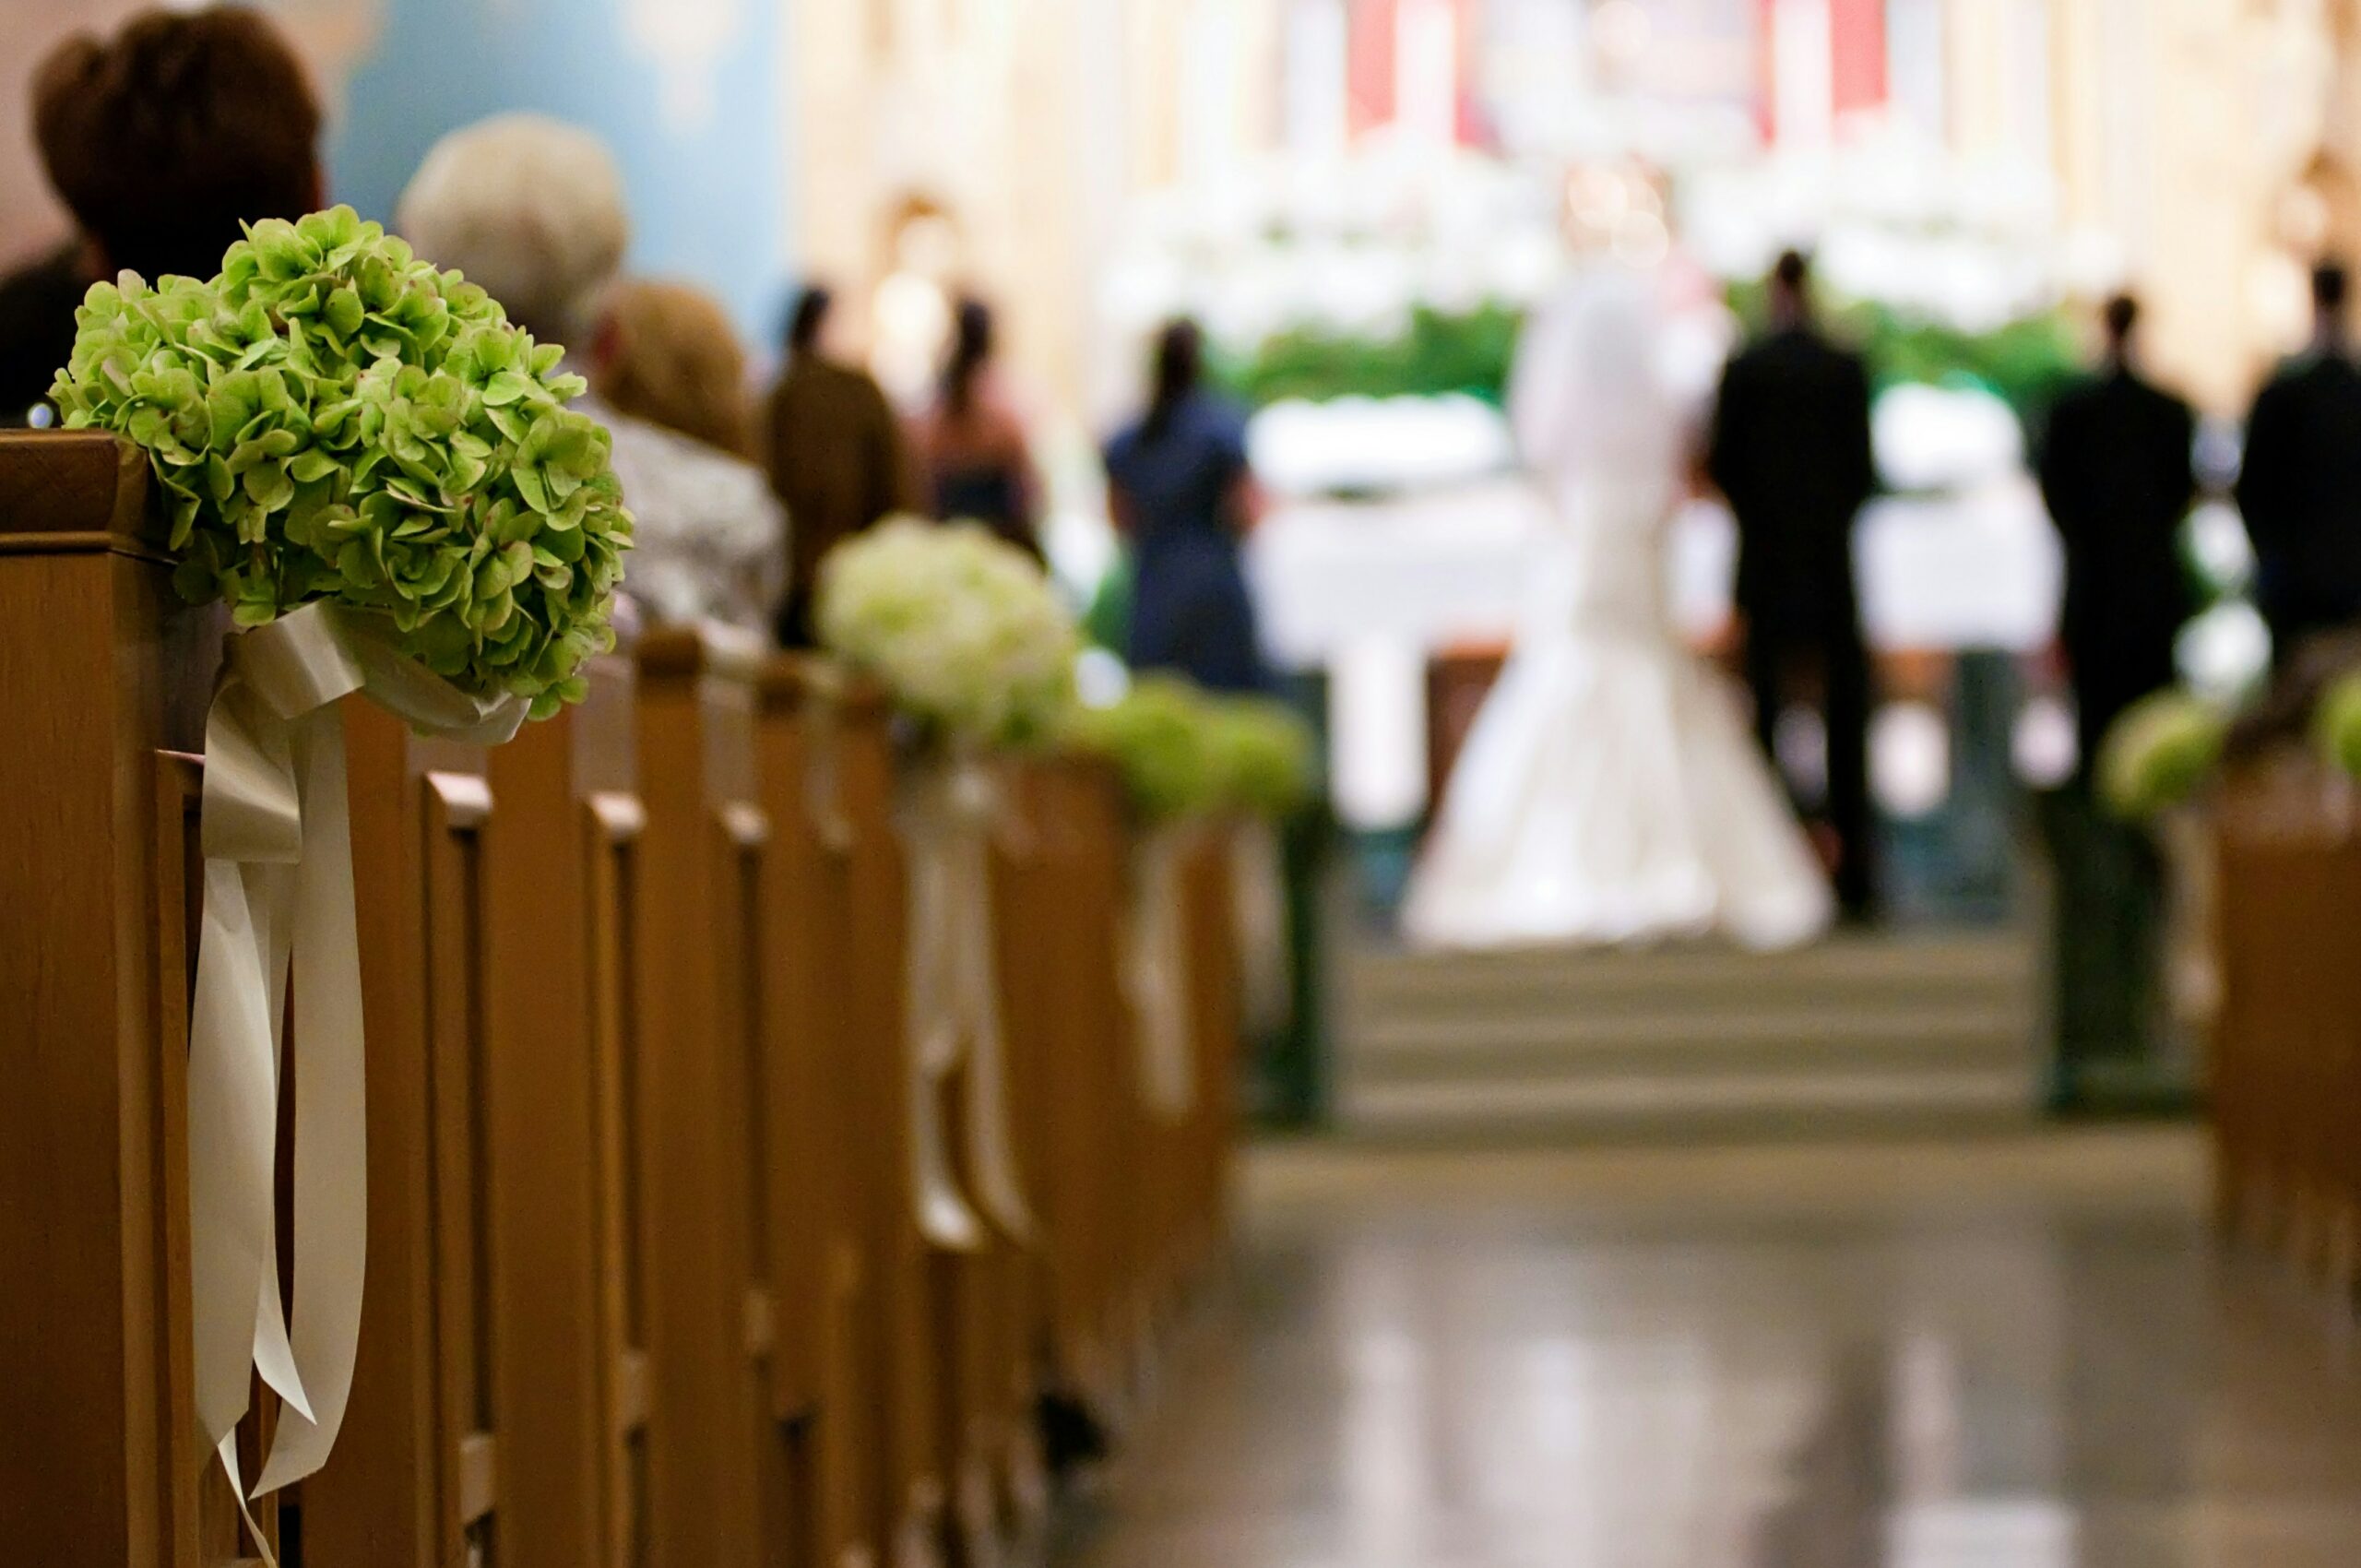 Our wedding recessional songs can be played as the newlyweds exit the ceremony.